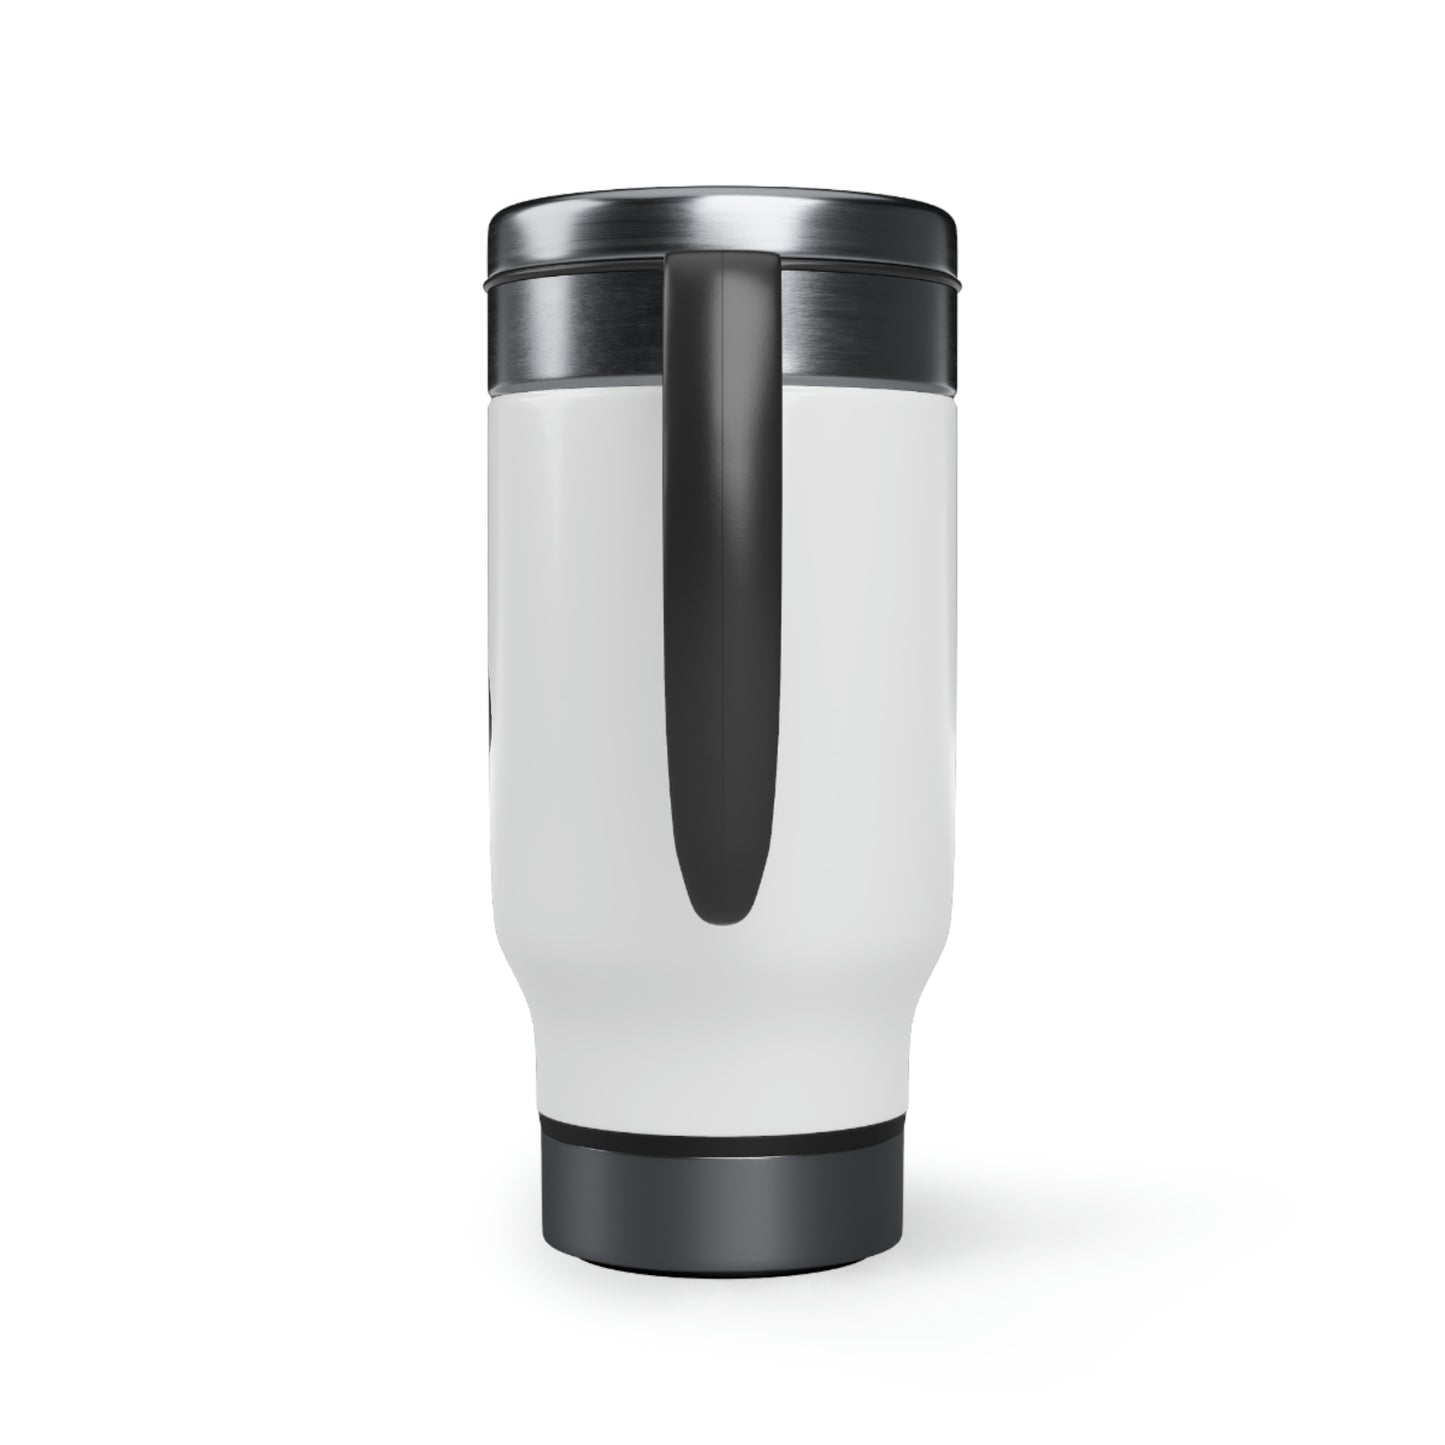 TOXICO Stainless Steel Travel Mug with Handle, 14oz